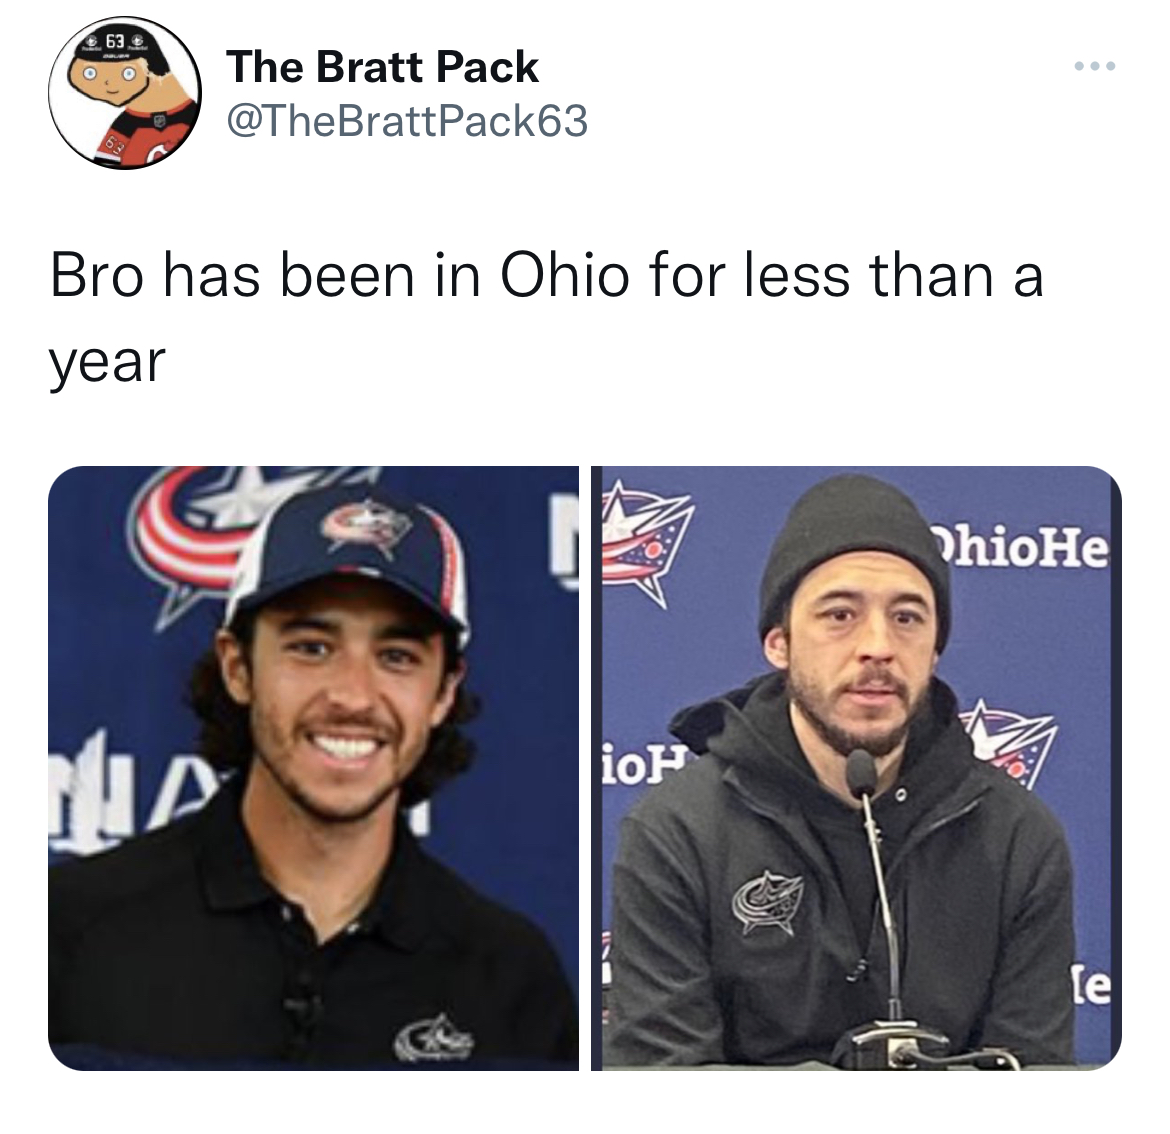 tweets dunking on celebs - cap - The Bratt Pack Bro has been in Ohio for less than a year Ha ioP ... hioHe e